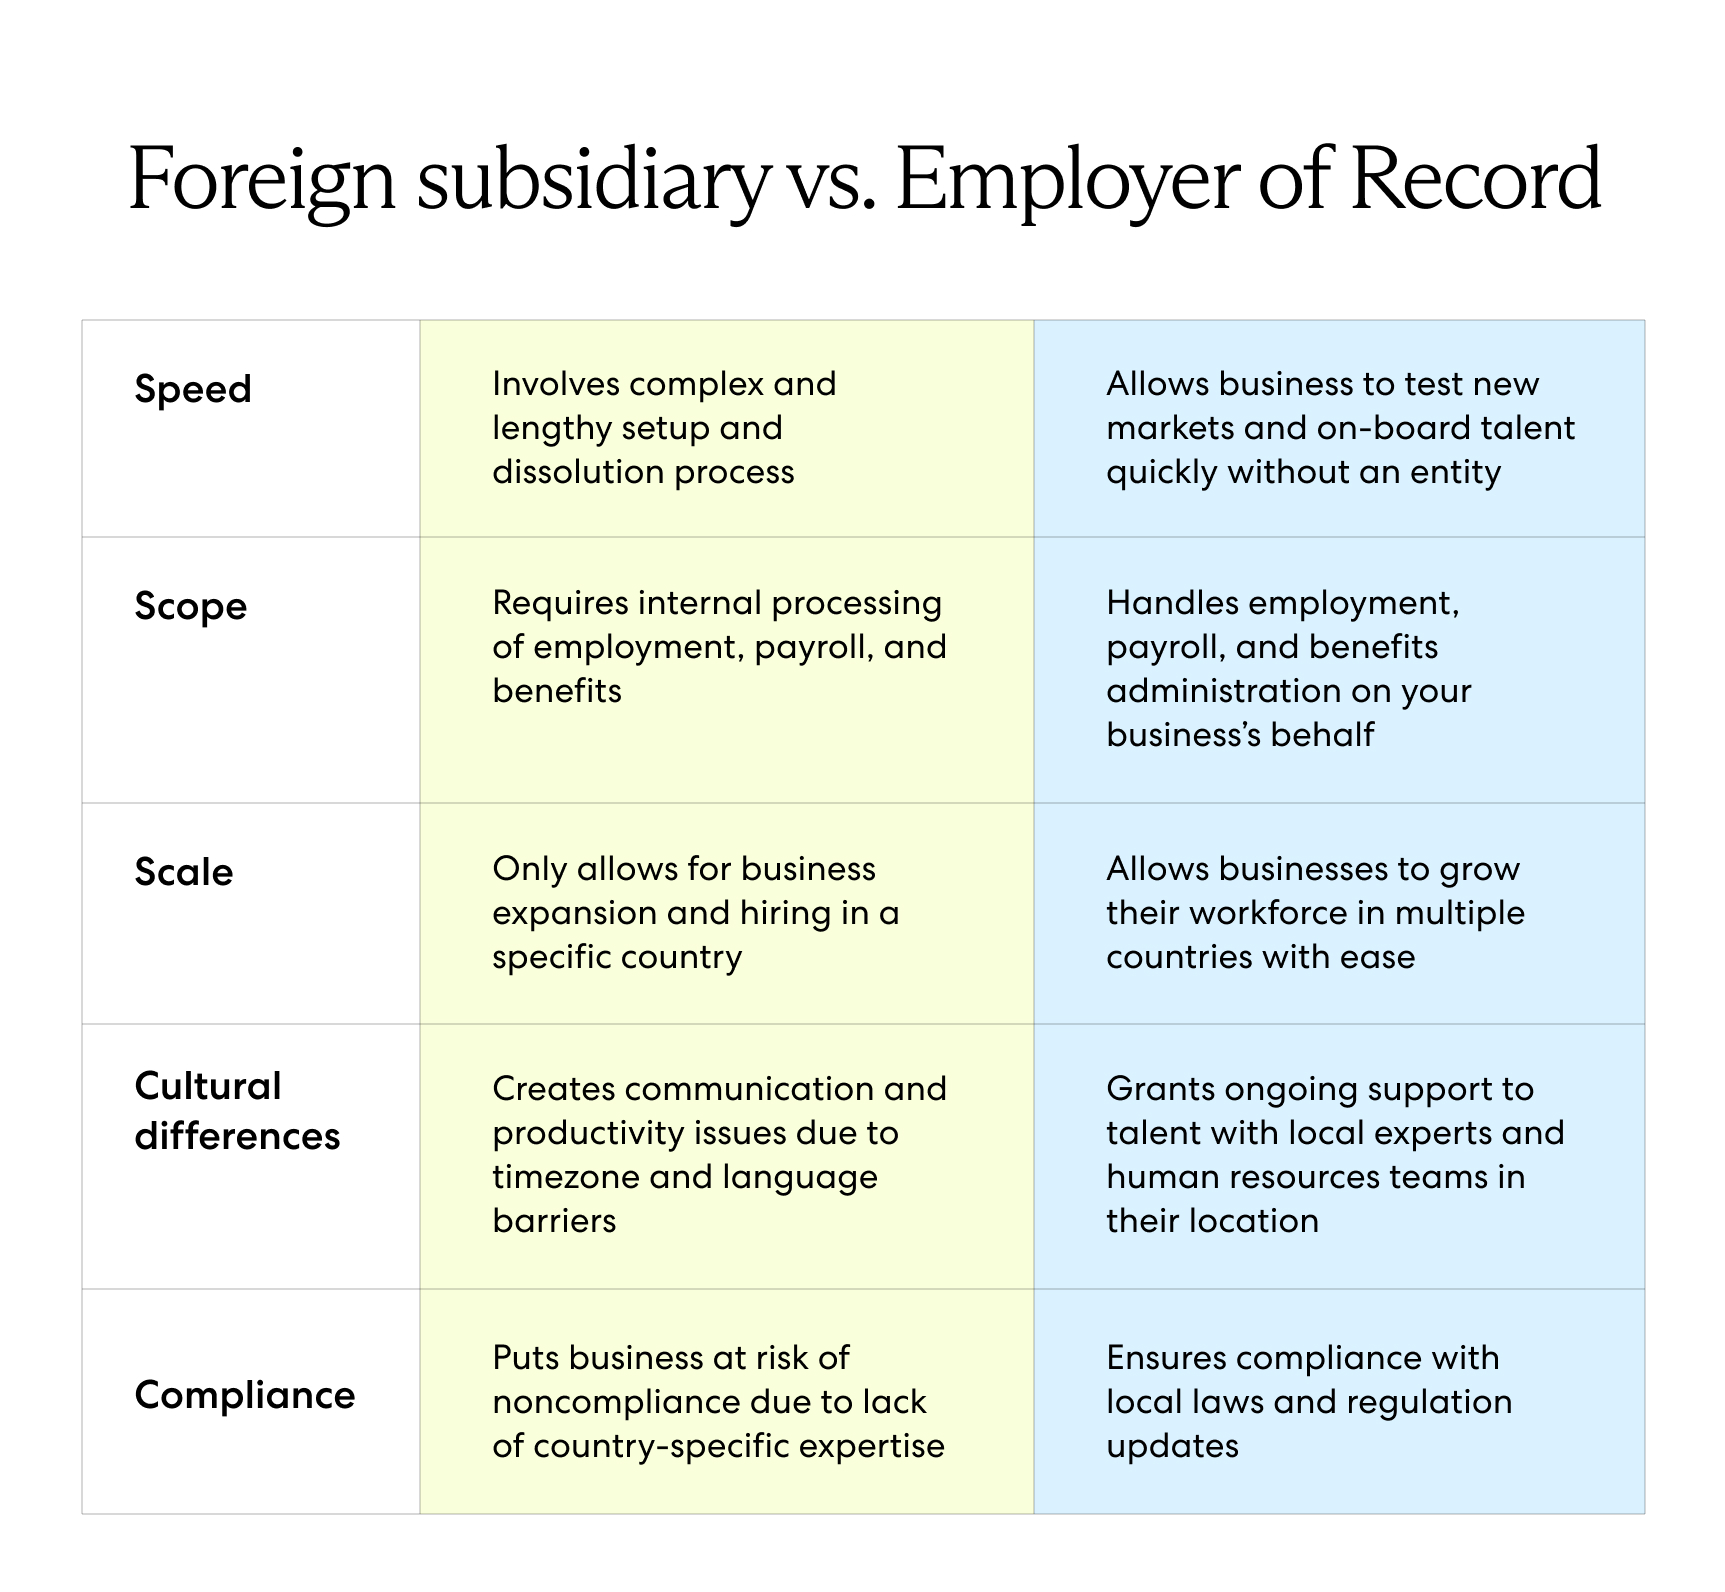 Chart comparing the differences between setting up a foreign subsidiary or using an employer of record for global expansion.